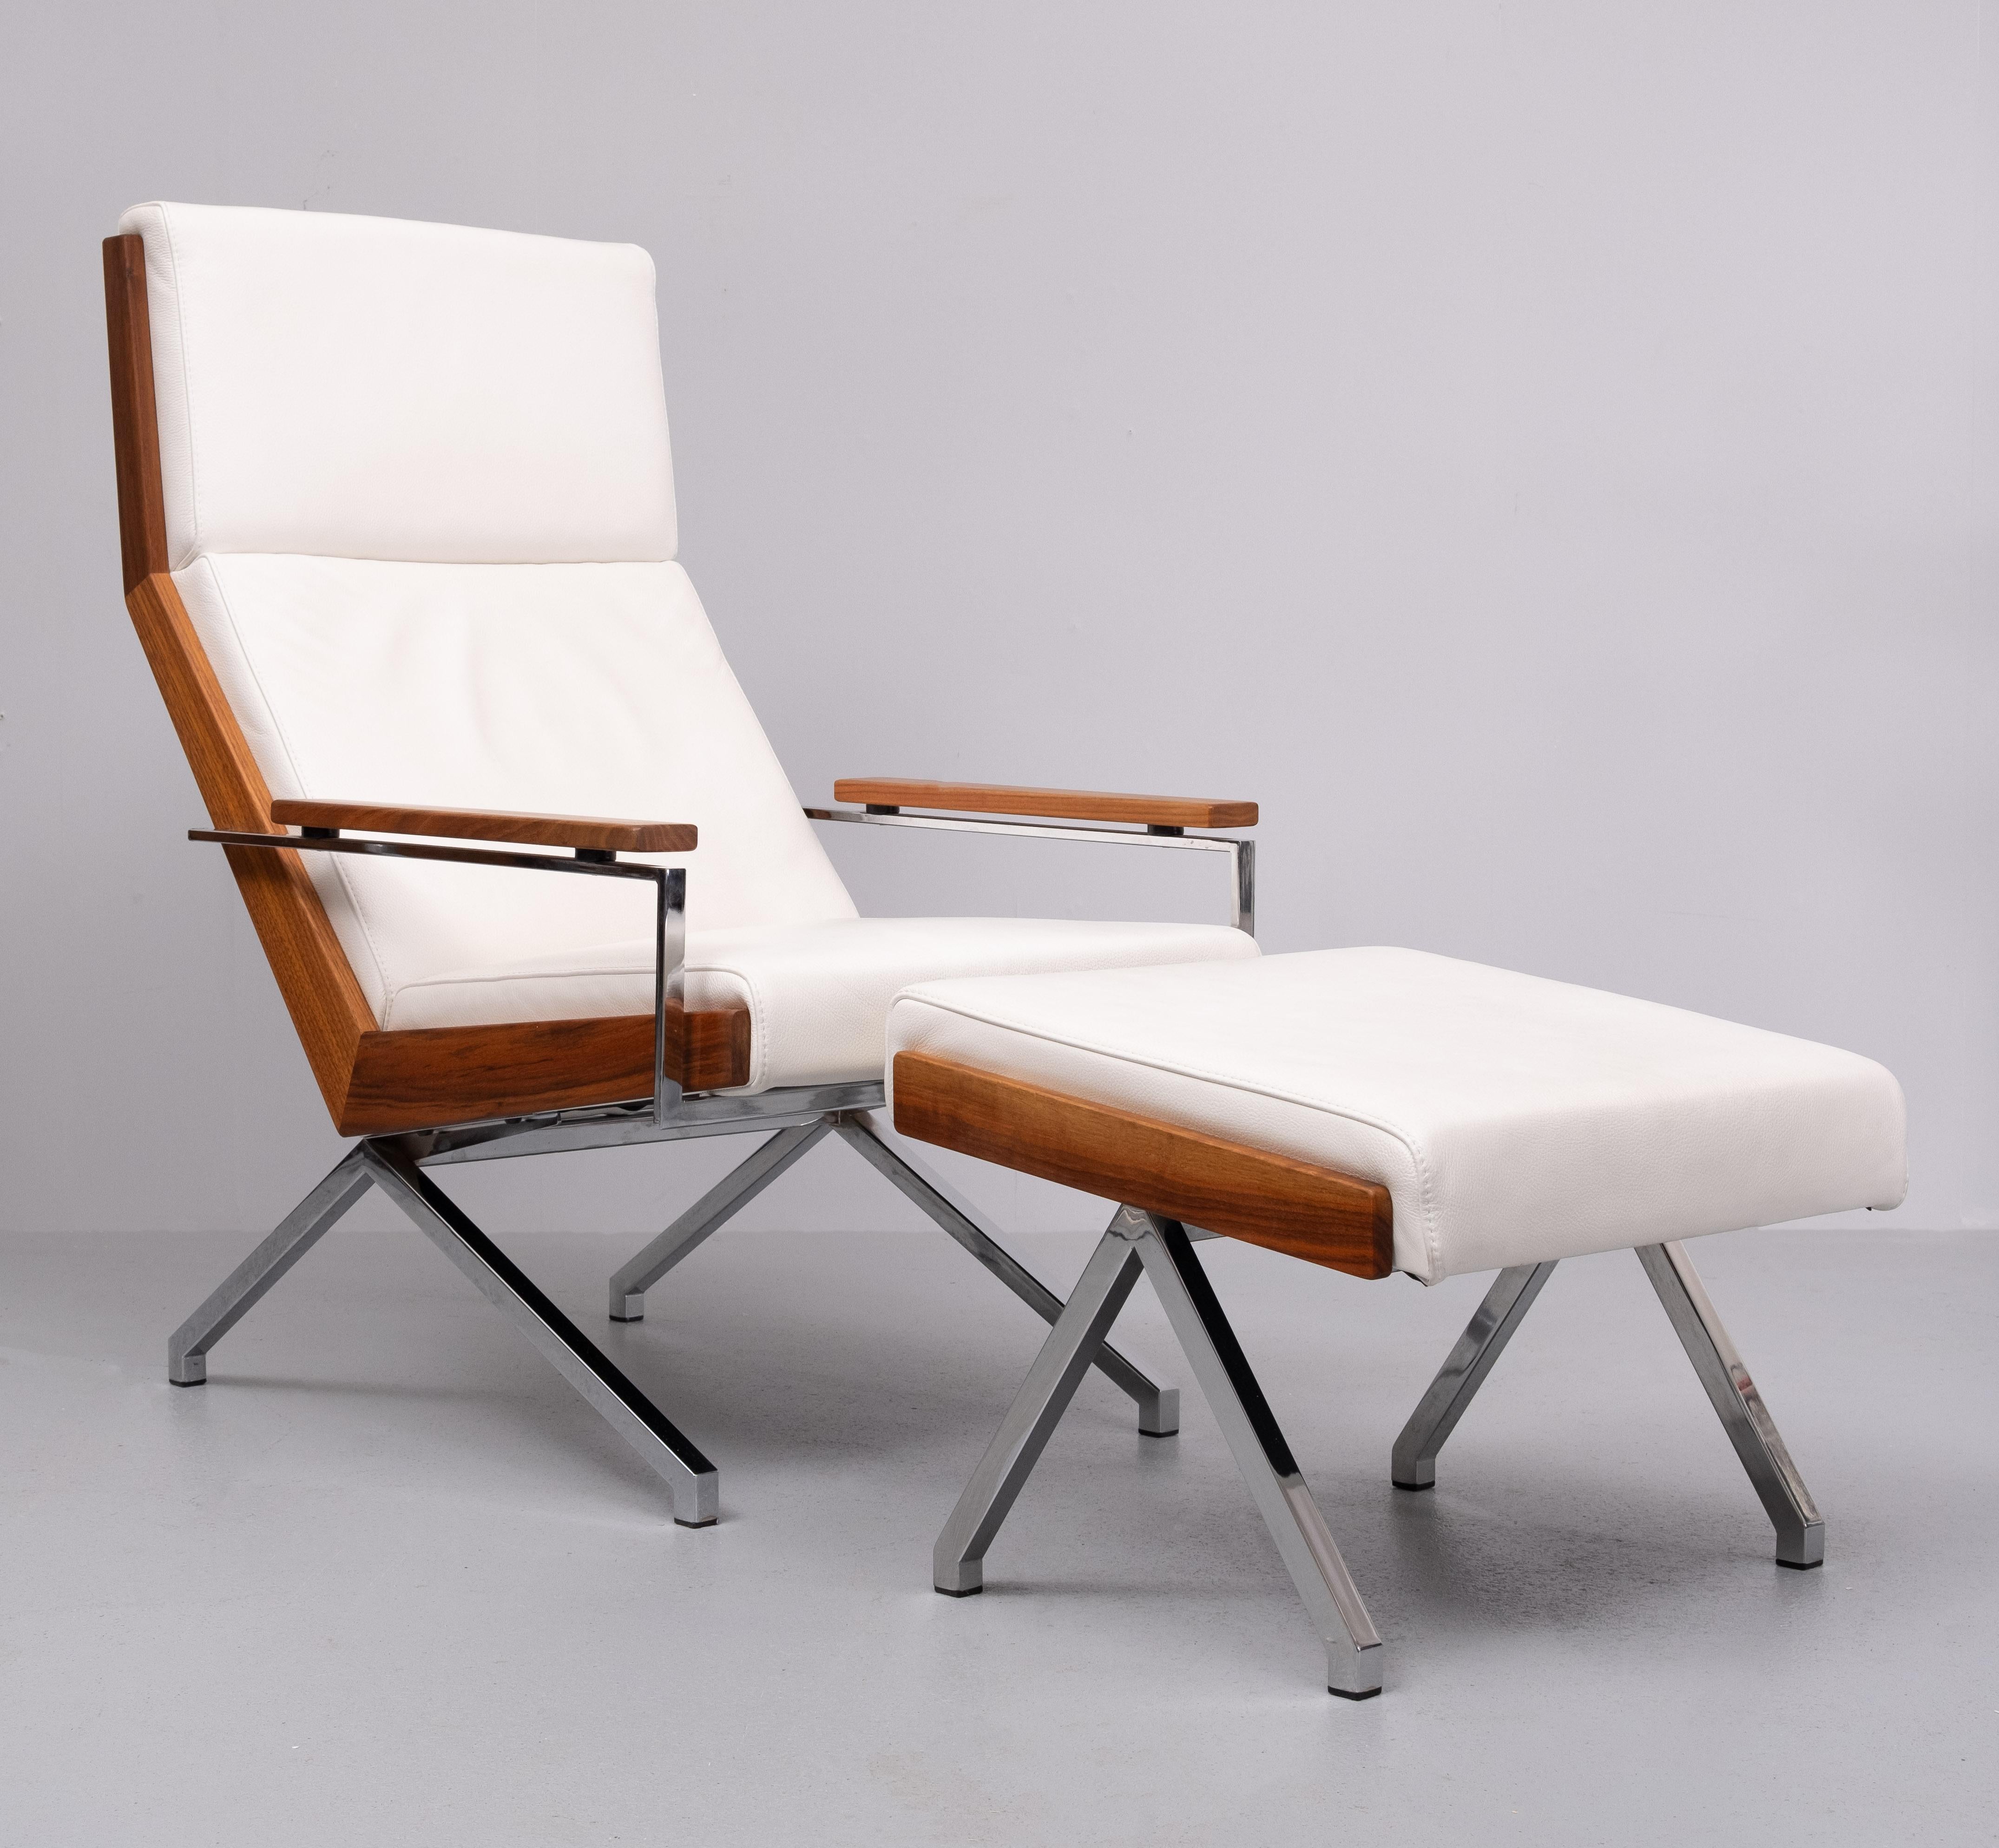 Fantastic White leather “Lotus” chair. and Ottoman  solid Teak frame and armrests, standing on a chromed metal sub-frame. Beautiful combination  The lotus chair is designed by Rob Parry in the 50’s for Gelderland (NL). This version (new release